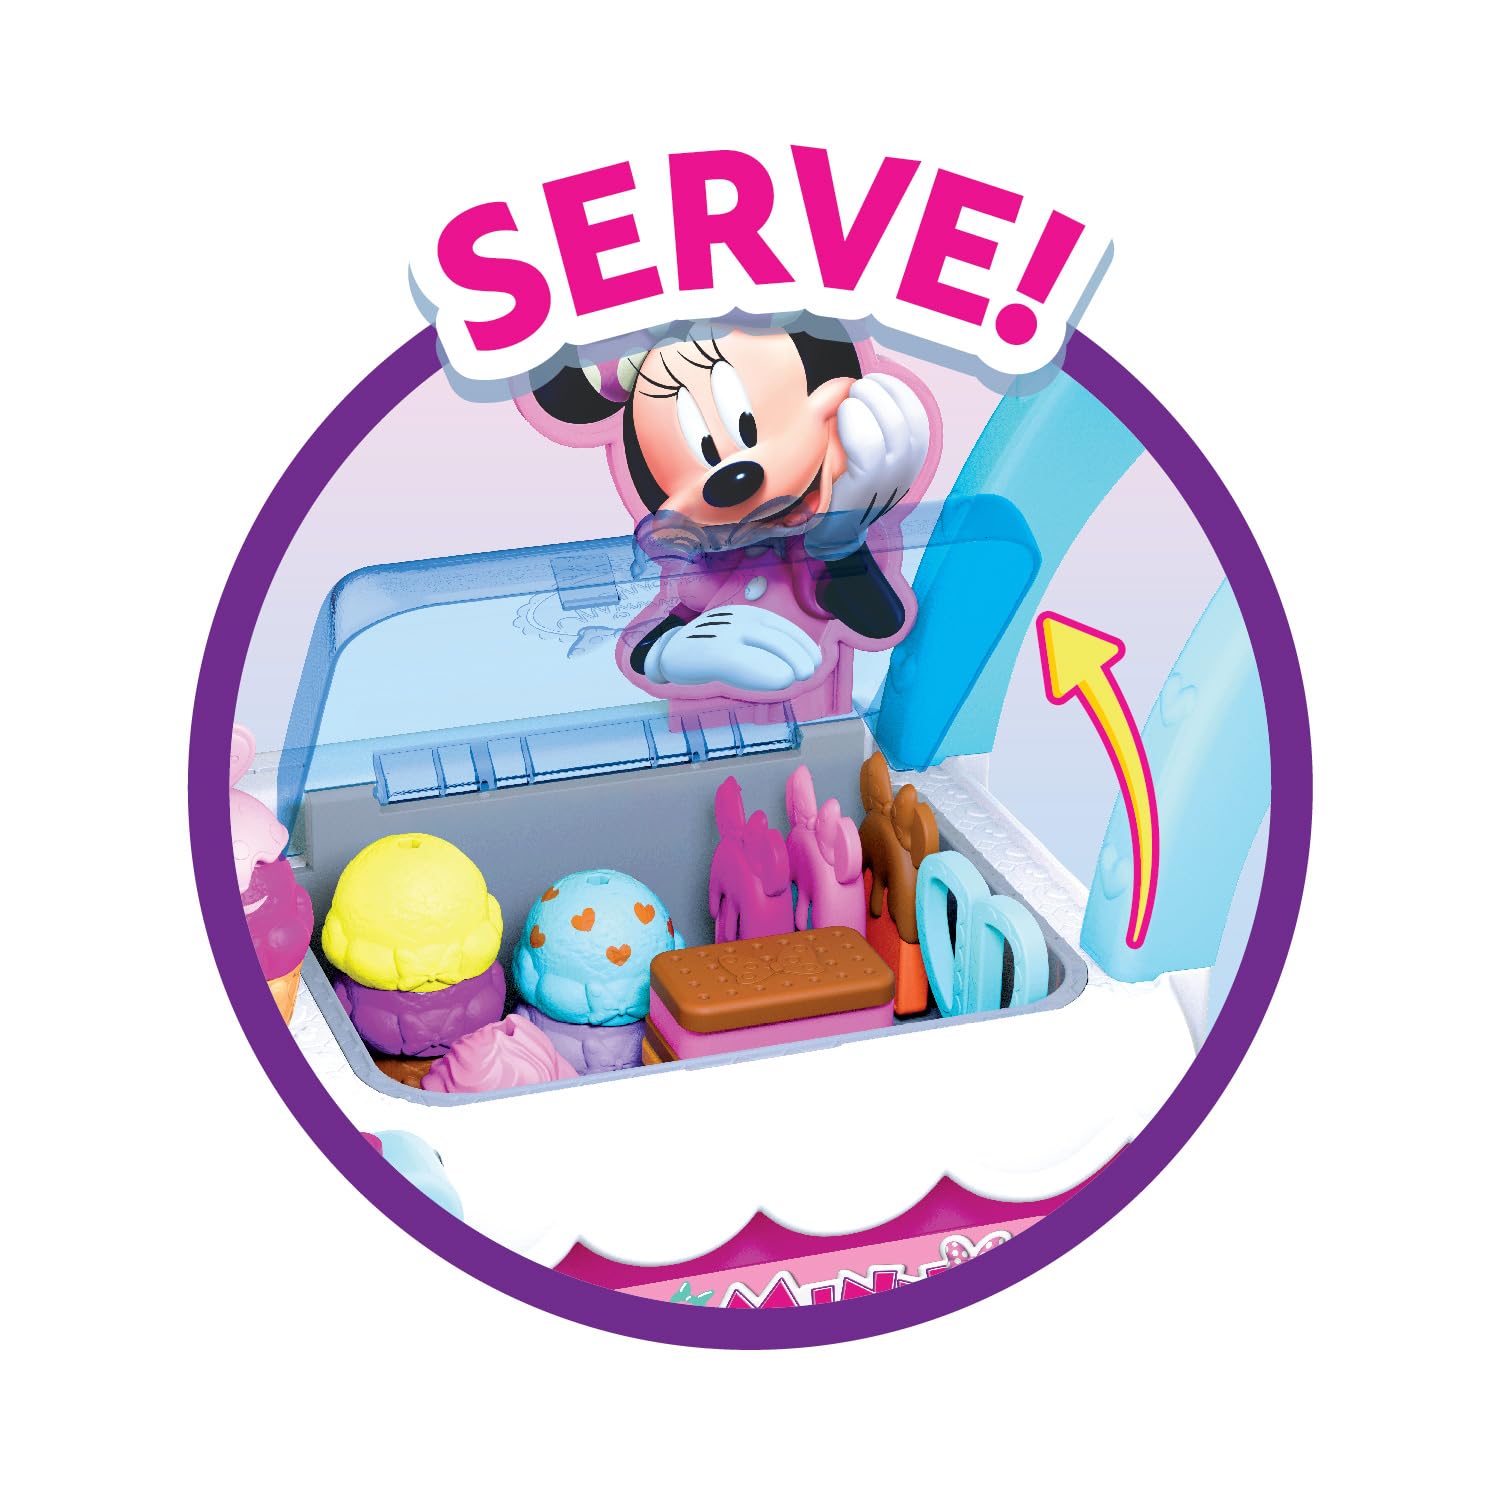 Disney Junior Minnie Mouse Sweets & Treats 2-foot Tall Rolling Ice Cream Cart, 39-pieces, Pretend Play Food Set, Officially Licensed Kids Toys for Ages 2 Up, Gifts and Presents by Just Play